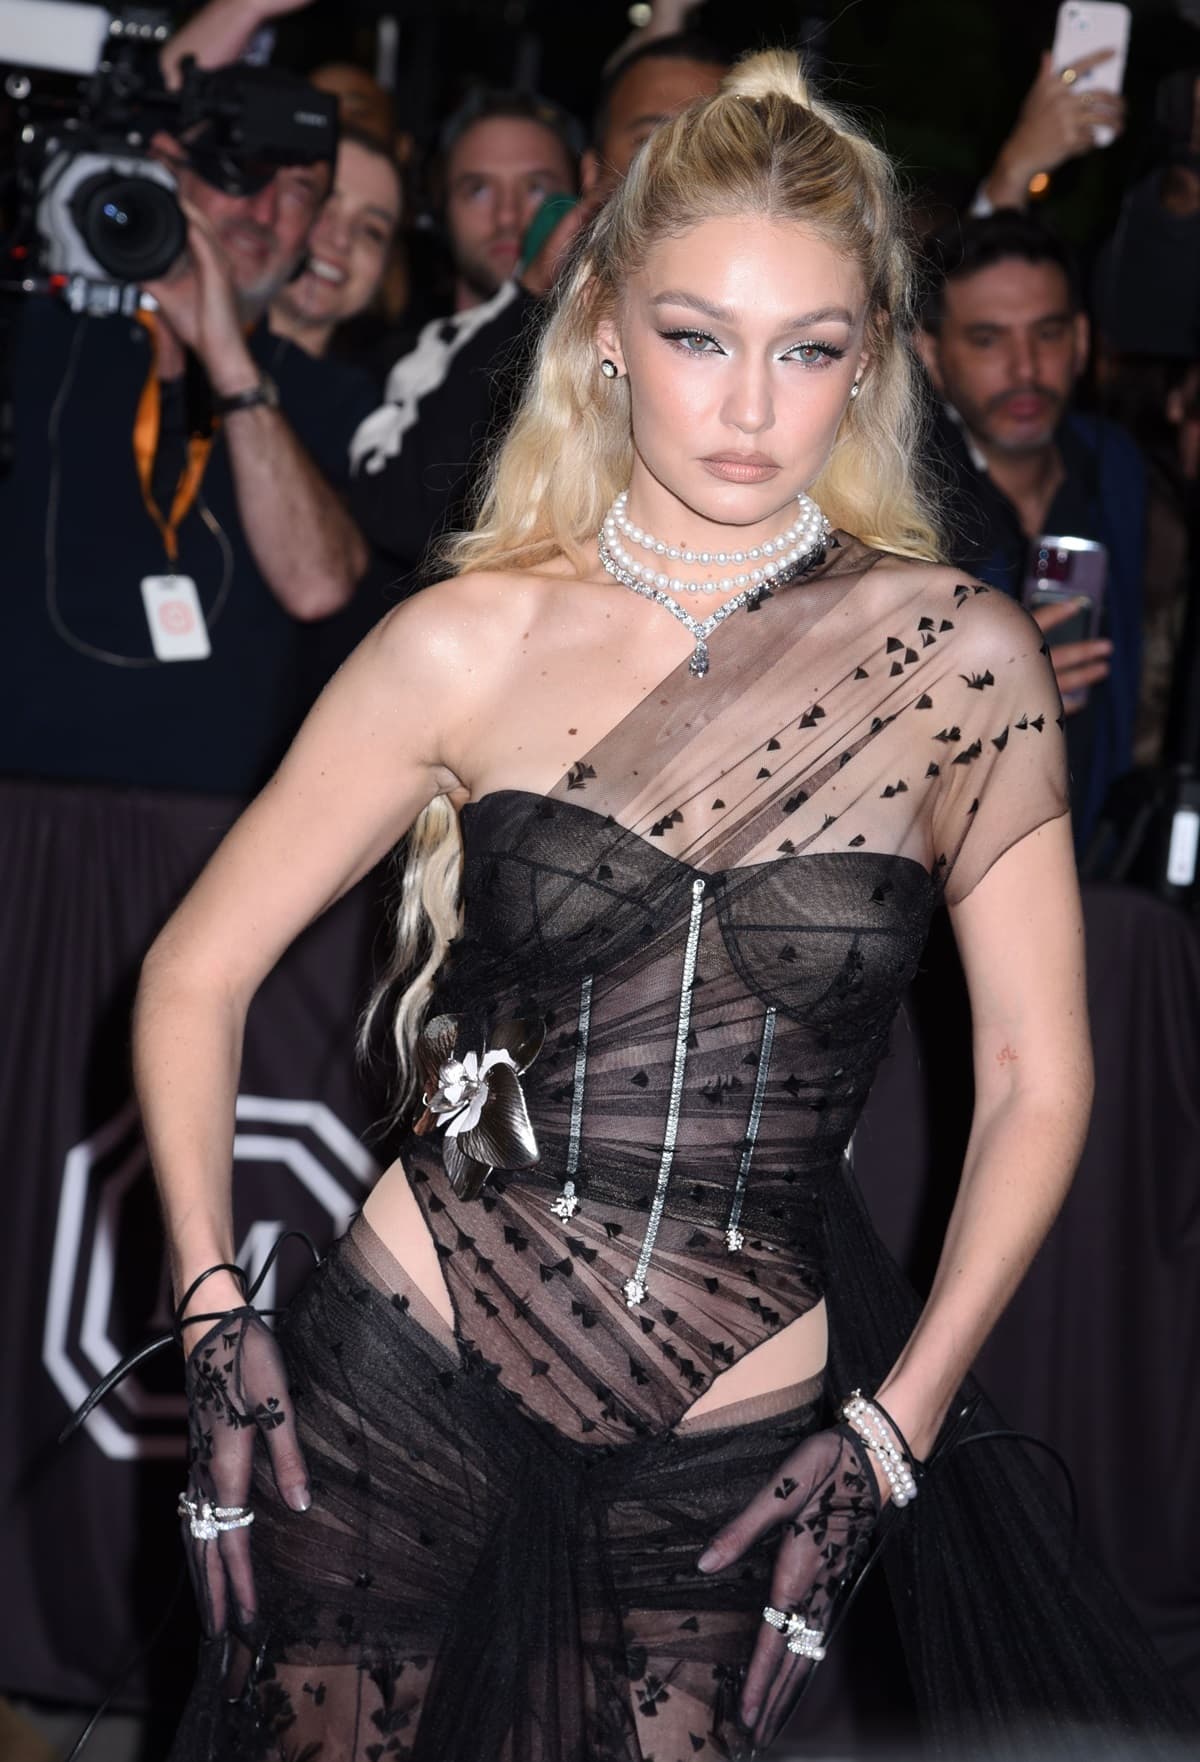 To complete the standout look, Gigi Hadid wore sheer black Calzedonia tights and accessorized with Lagos jewelry, including a pearl and diamond choker and diamond stud earrings